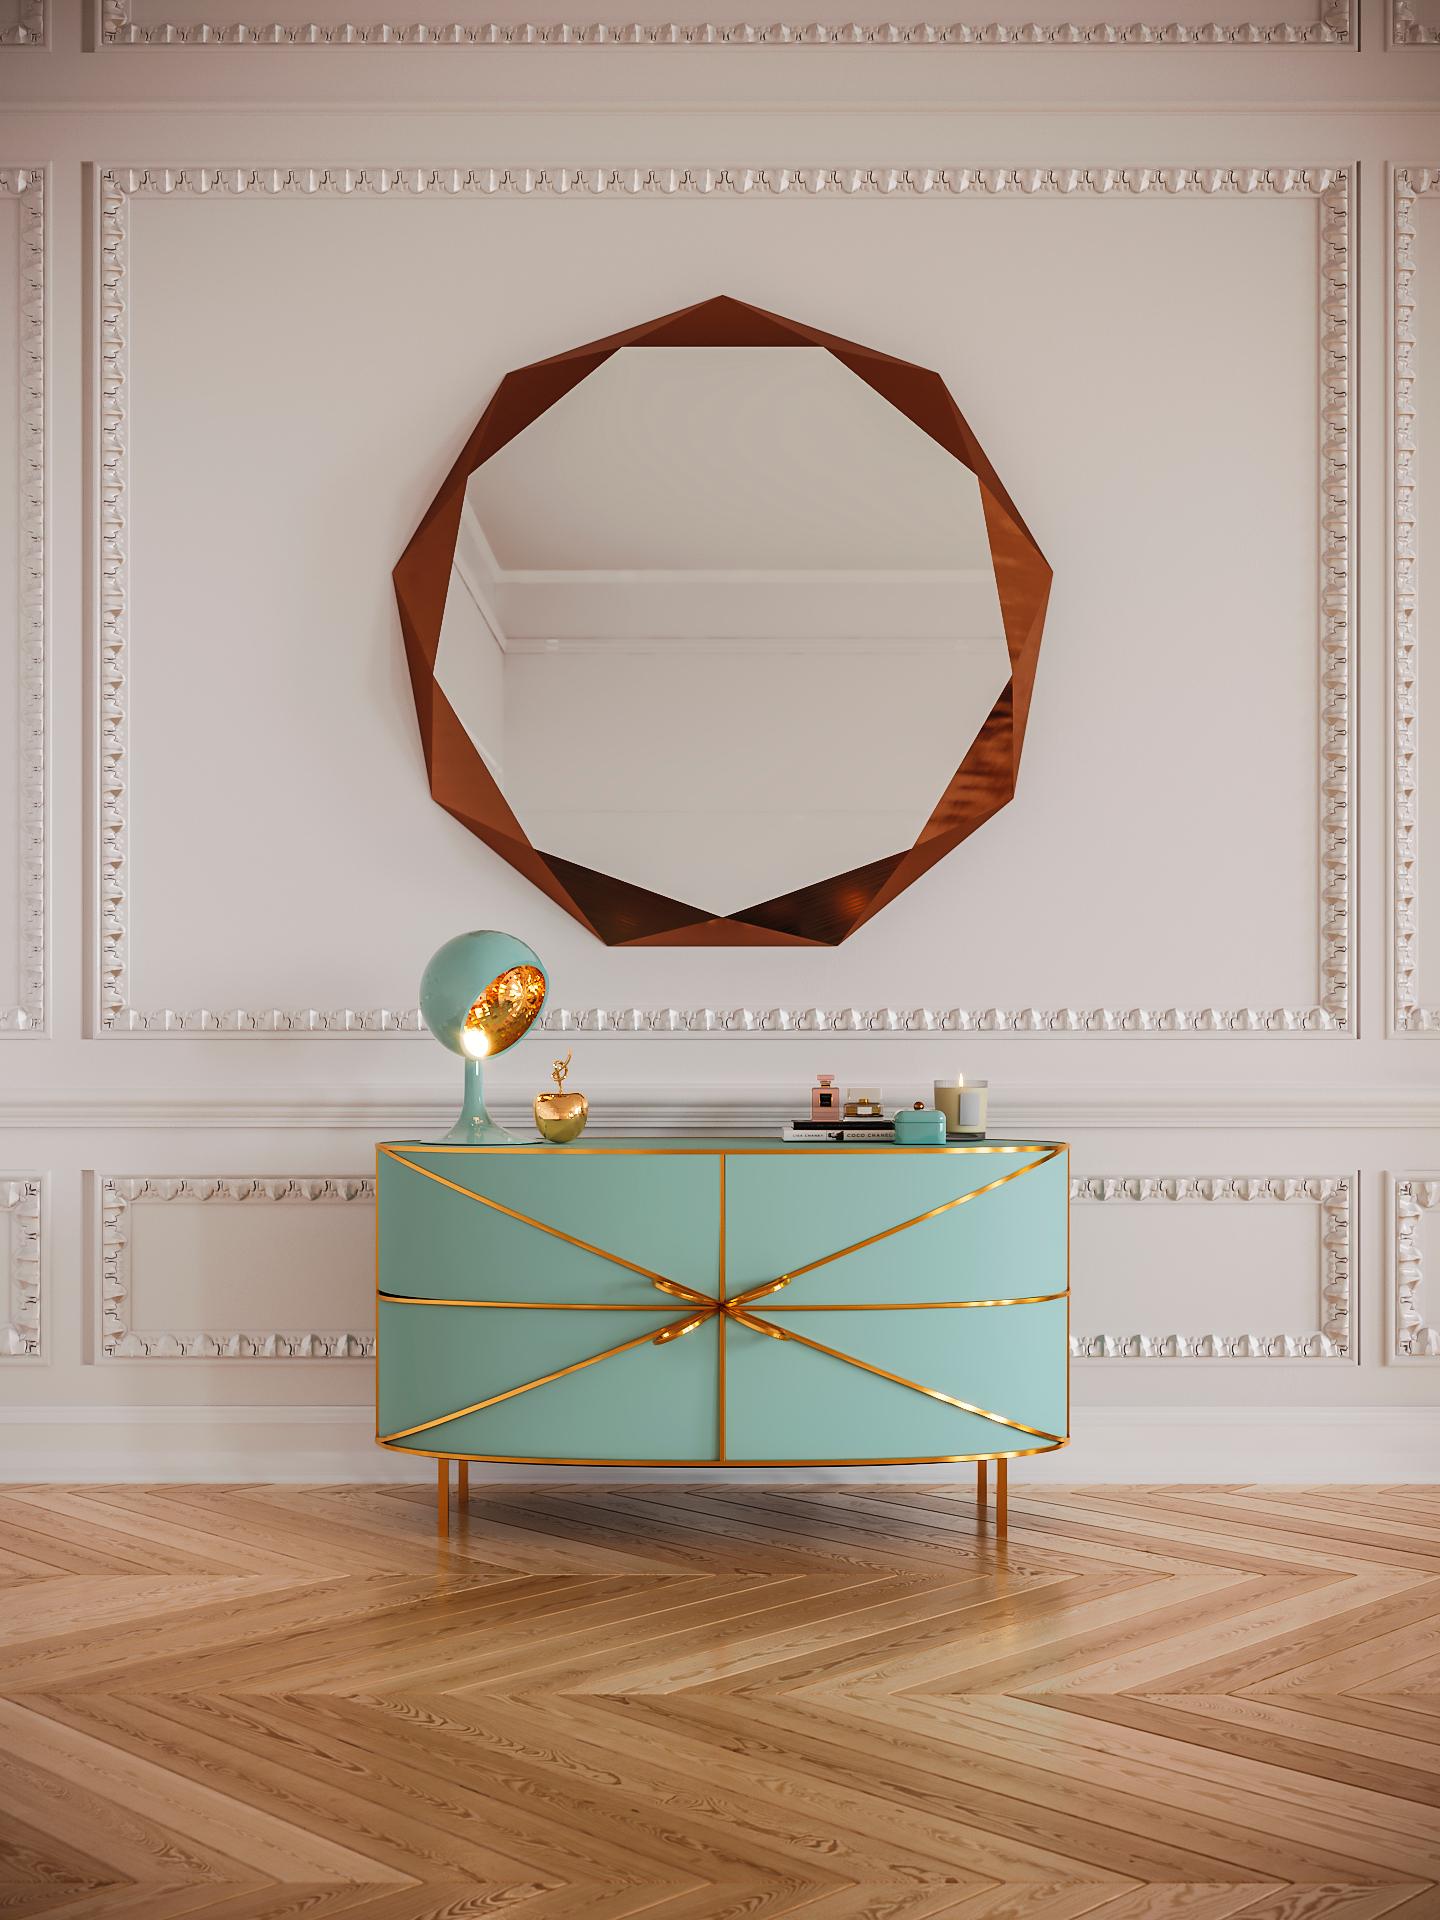 88 Secrets Mint Green Sideboard with Gold Trims by Nika Zupanc is a mint green cabinet in sensuous, feminine lines with luxurious metal trims in gold. A statement piece in any interior space!

Nika Zupanc, a strikingly renowned Slovenian designer,